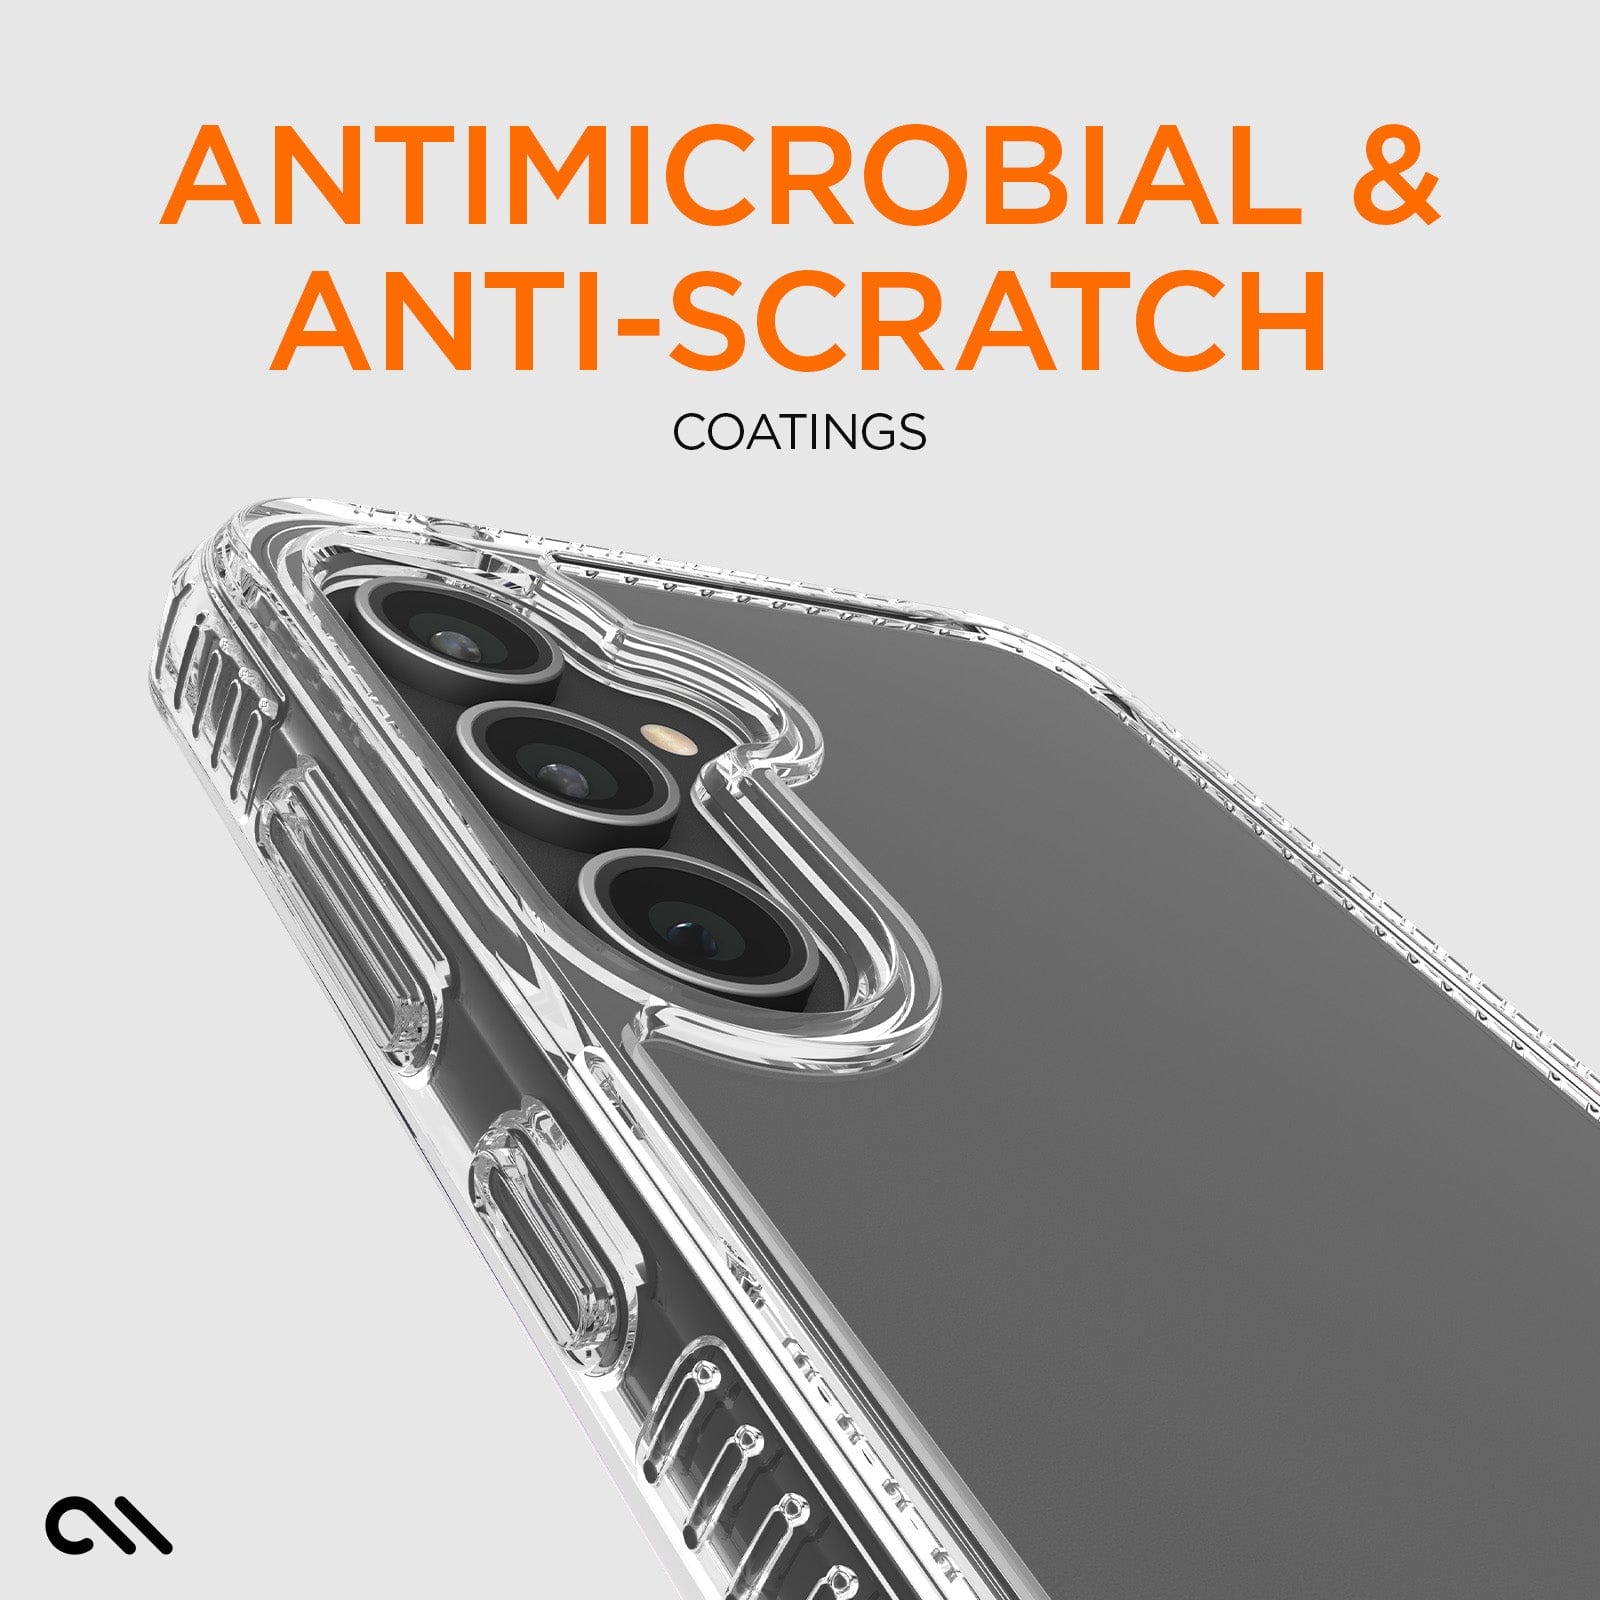 ANTIMICROBIAL AND ANTI SCRATCH COATINGS